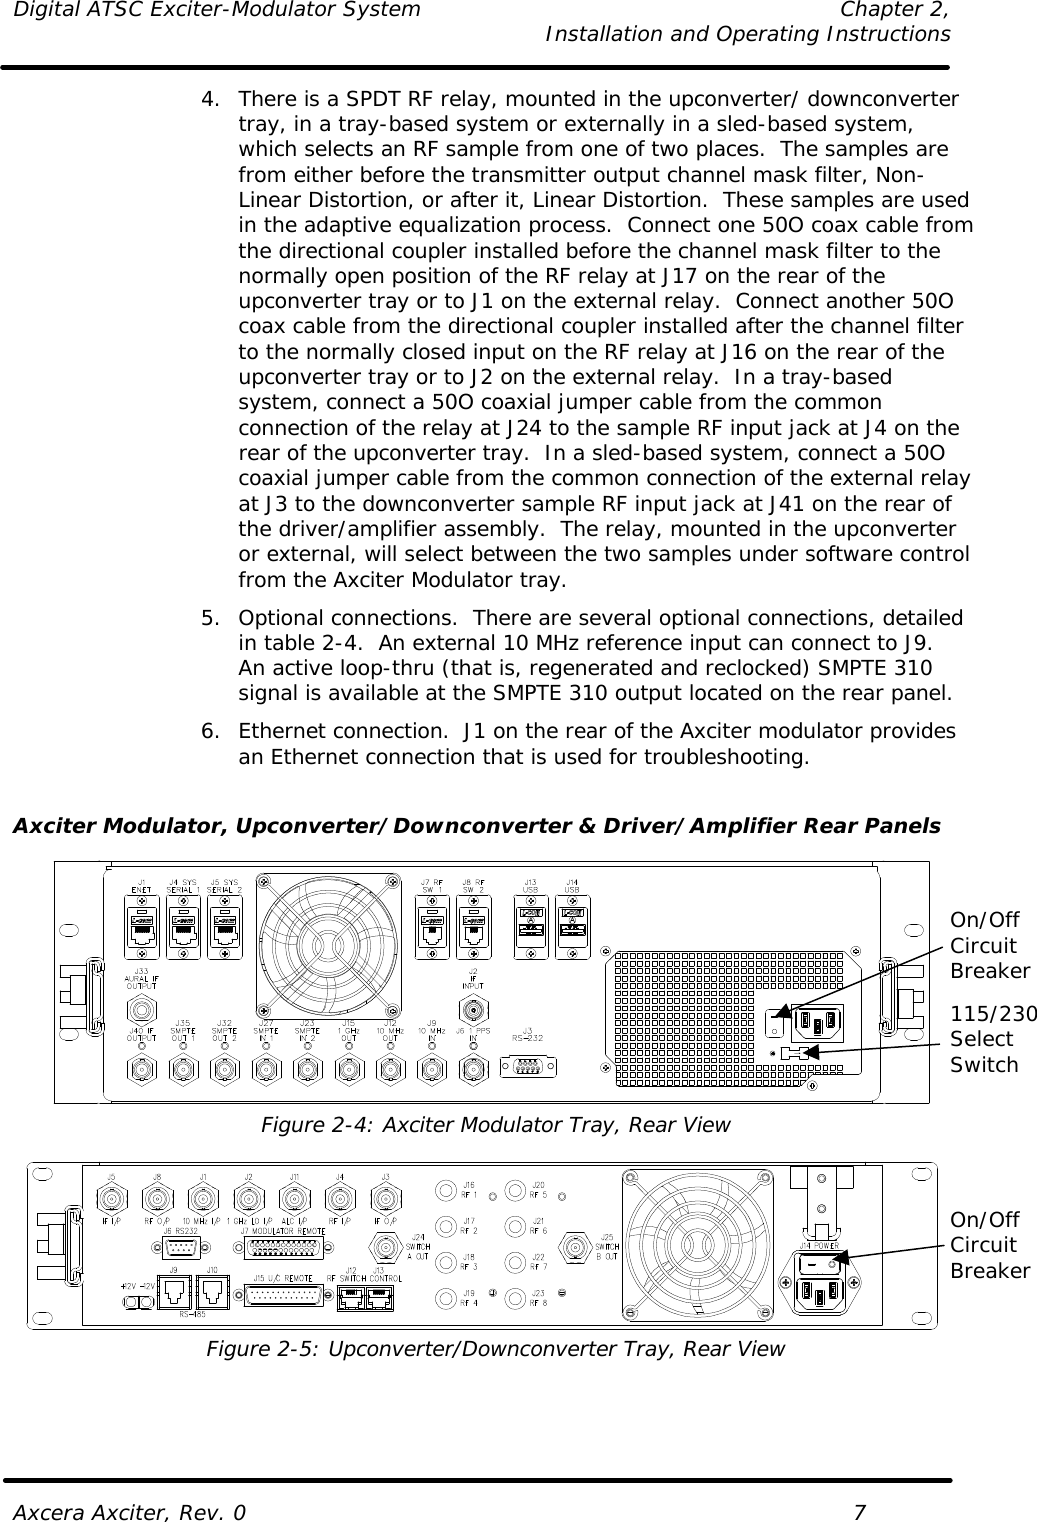 Digital ATSC Exciter-Modulator System Chapter 2,   Installation and Operating Instructions  Axcera Axciter, Rev. 0    7 4. There is a SPDT RF relay, mounted in the upconverter/ downconverter tray, in a tray-based system or externally in a sled-based system, which selects an RF sample from one of two places.  The samples are from either before the transmitter output channel mask filter, Non-Linear Distortion, or after it, Linear Distortion.  These samples are used in the adaptive equalization process.  Connect one 50O coax cable from the directional coupler installed before the channel mask filter to the normally open position of the RF relay at J17 on the rear of the upconverter tray or to J1 on the external relay.  Connect another 50O coax cable from the directional coupler installed after the channel filter to the normally closed input on the RF relay at J16 on the rear of the upconverter tray or to J2 on the external relay.  In a tray-based system, connect a 50O coaxial jumper cable from the common connection of the relay at J24 to the sample RF input jack at J4 on the rear of the upconverter tray.  In a sled-based system, connect a 50O coaxial jumper cable from the common connection of the external relay at J3 to the downconverter sample RF input jack at J41 on the rear of the driver/amplifier assembly.  The relay, mounted in the upconverter or external, will select between the two samples under software control from the Axciter Modulator tray. 5. Optional connections.  There are several optional connections, detailed in table 2-4.  An external 10 MHz reference input can connect to J9.  An active loop-thru (that is, regenerated and reclocked) SMPTE 310 signal is available at the SMPTE 310 output located on the rear panel. 6. Ethernet connection.  J1 on the rear of the Axciter modulator provides an Ethernet connection that is used for troubleshooting.  Axciter Modulator, Upconverter/Downconverter &amp; Driver/Amplifier Rear Panels   Figure 2-4: Axciter Modulator Tray, Rear View   Figure 2-5: Upconverter/Downconverter Tray, Rear View 115/230 Select Switch On/Off Circuit Breaker On/Off Circuit Breaker 